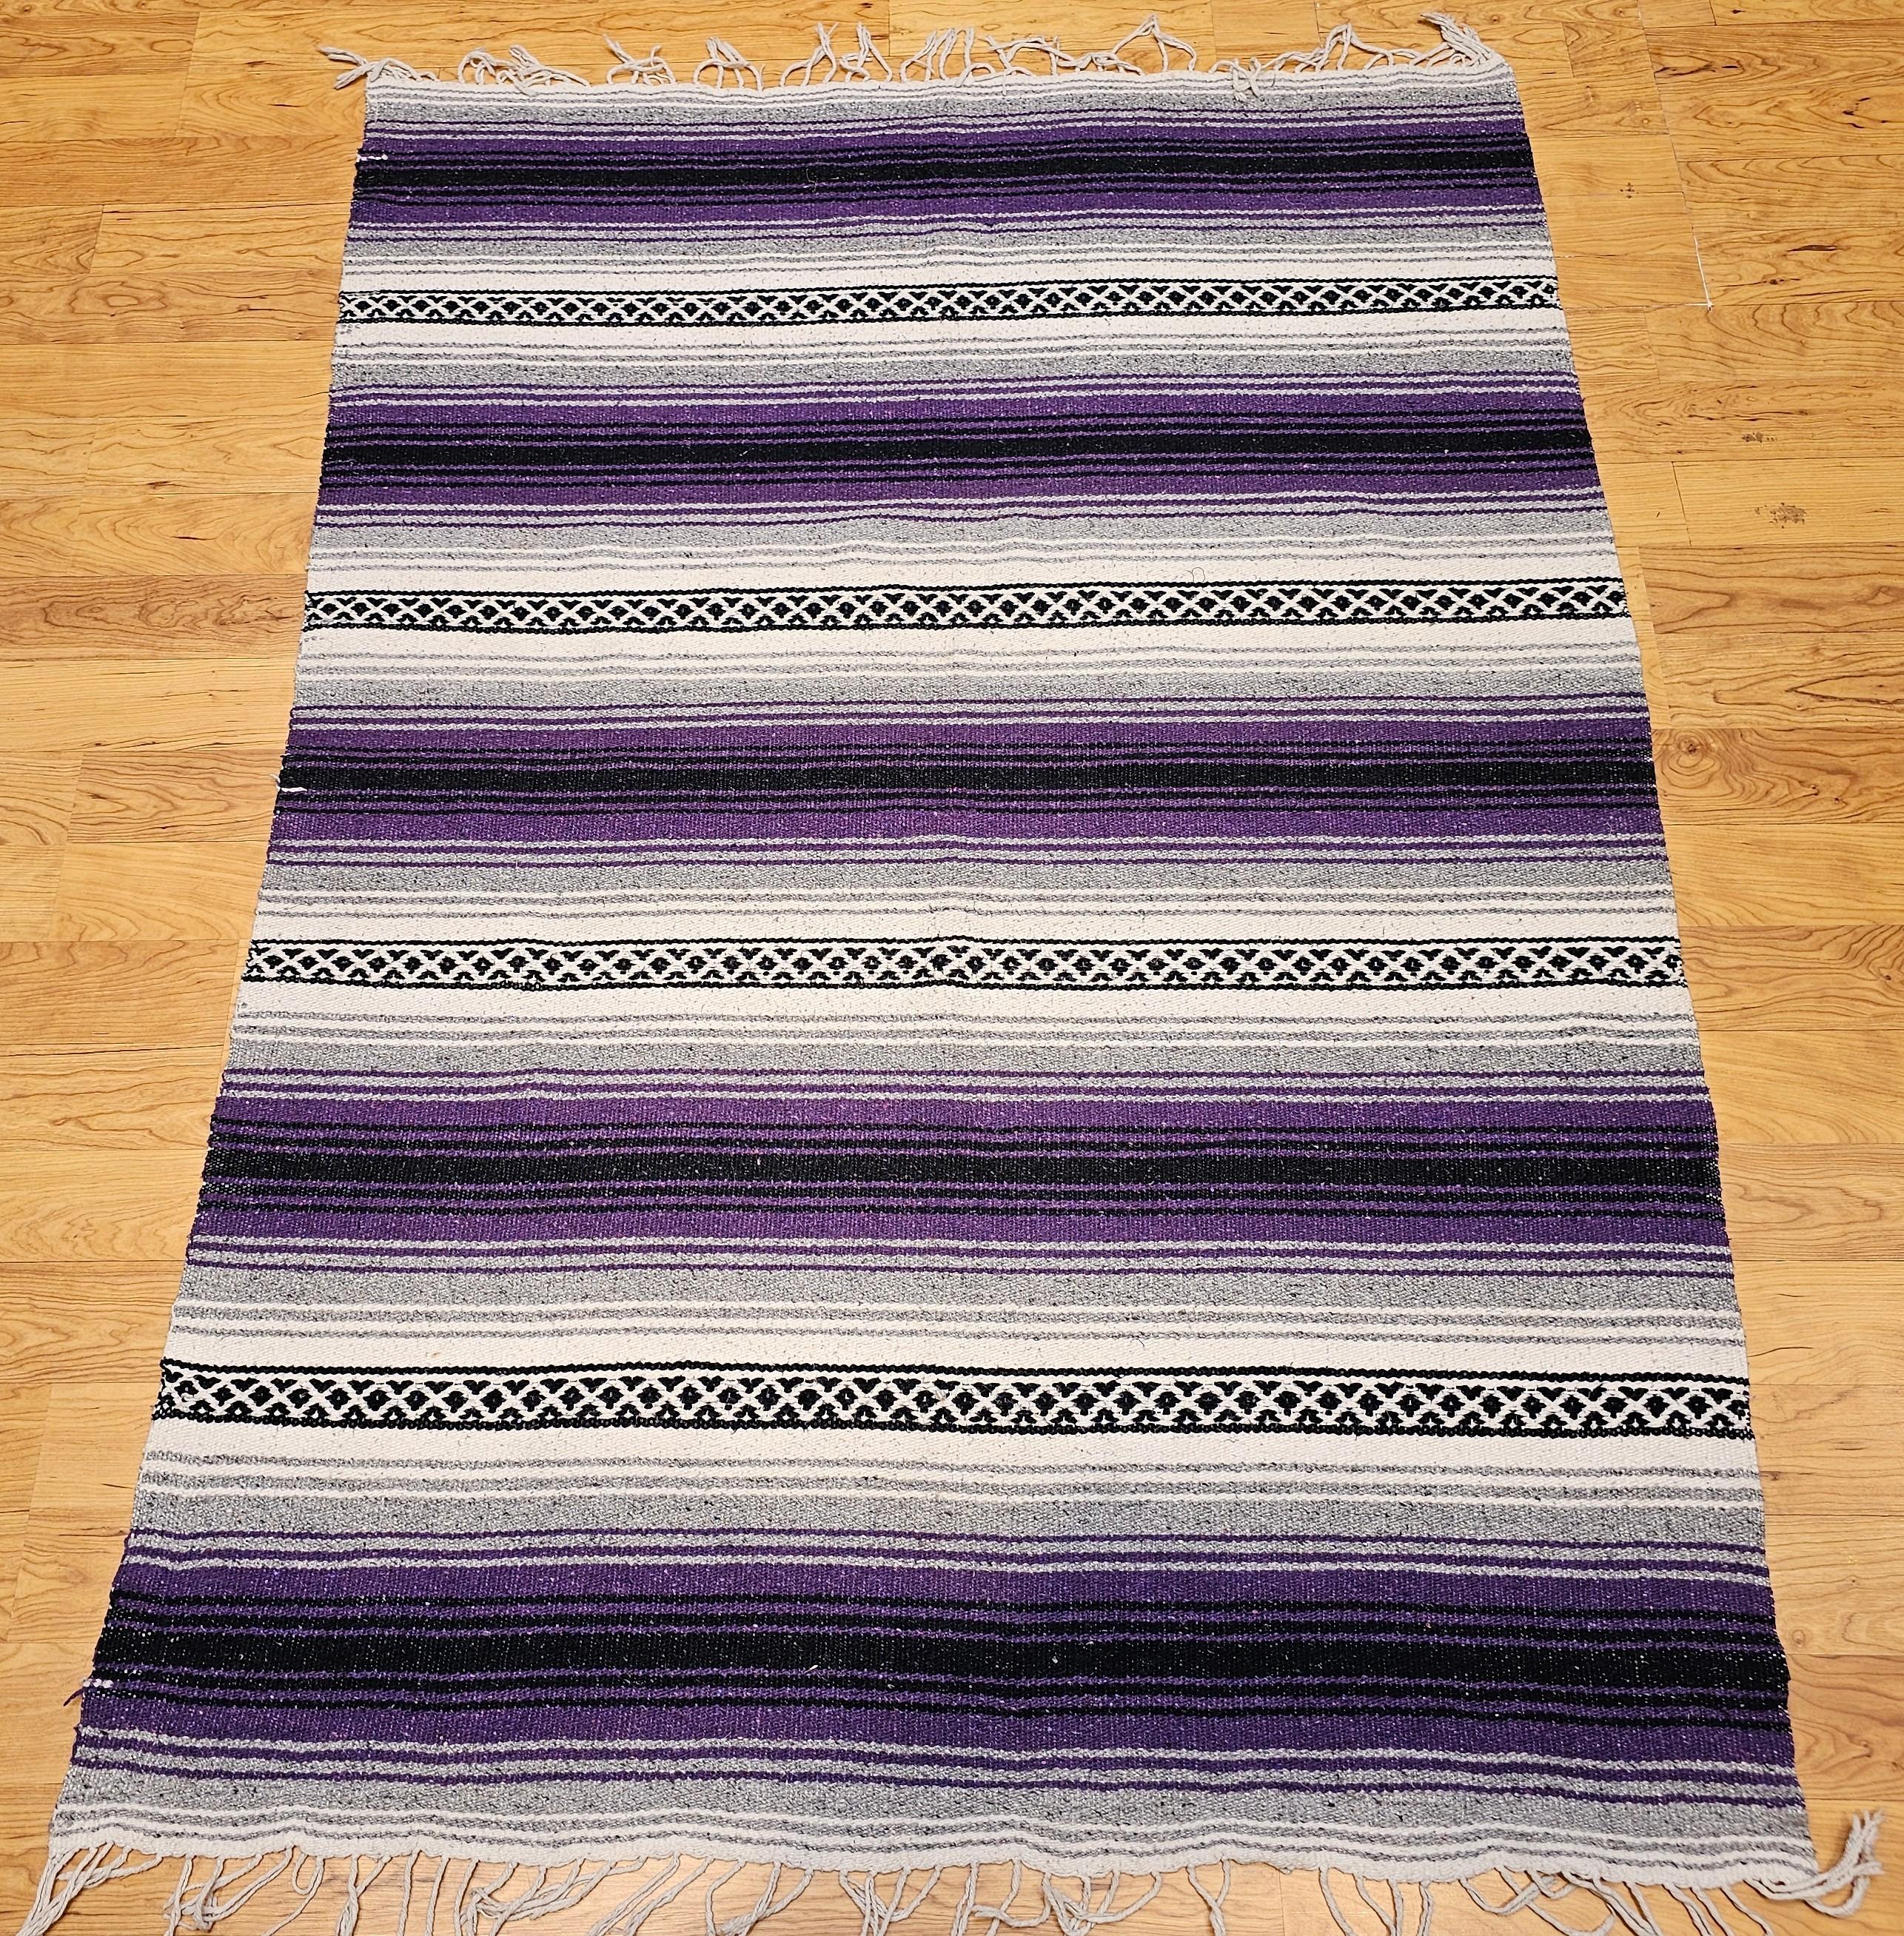 Vintage American Southwestern Kilim in alternating wide and narrow stripe pattern separated by narrow geometric bands in brilliant colors of lavender, gray, black and ivory.    The kilim is a flat woven rug so both sides of the rug can be used.  The